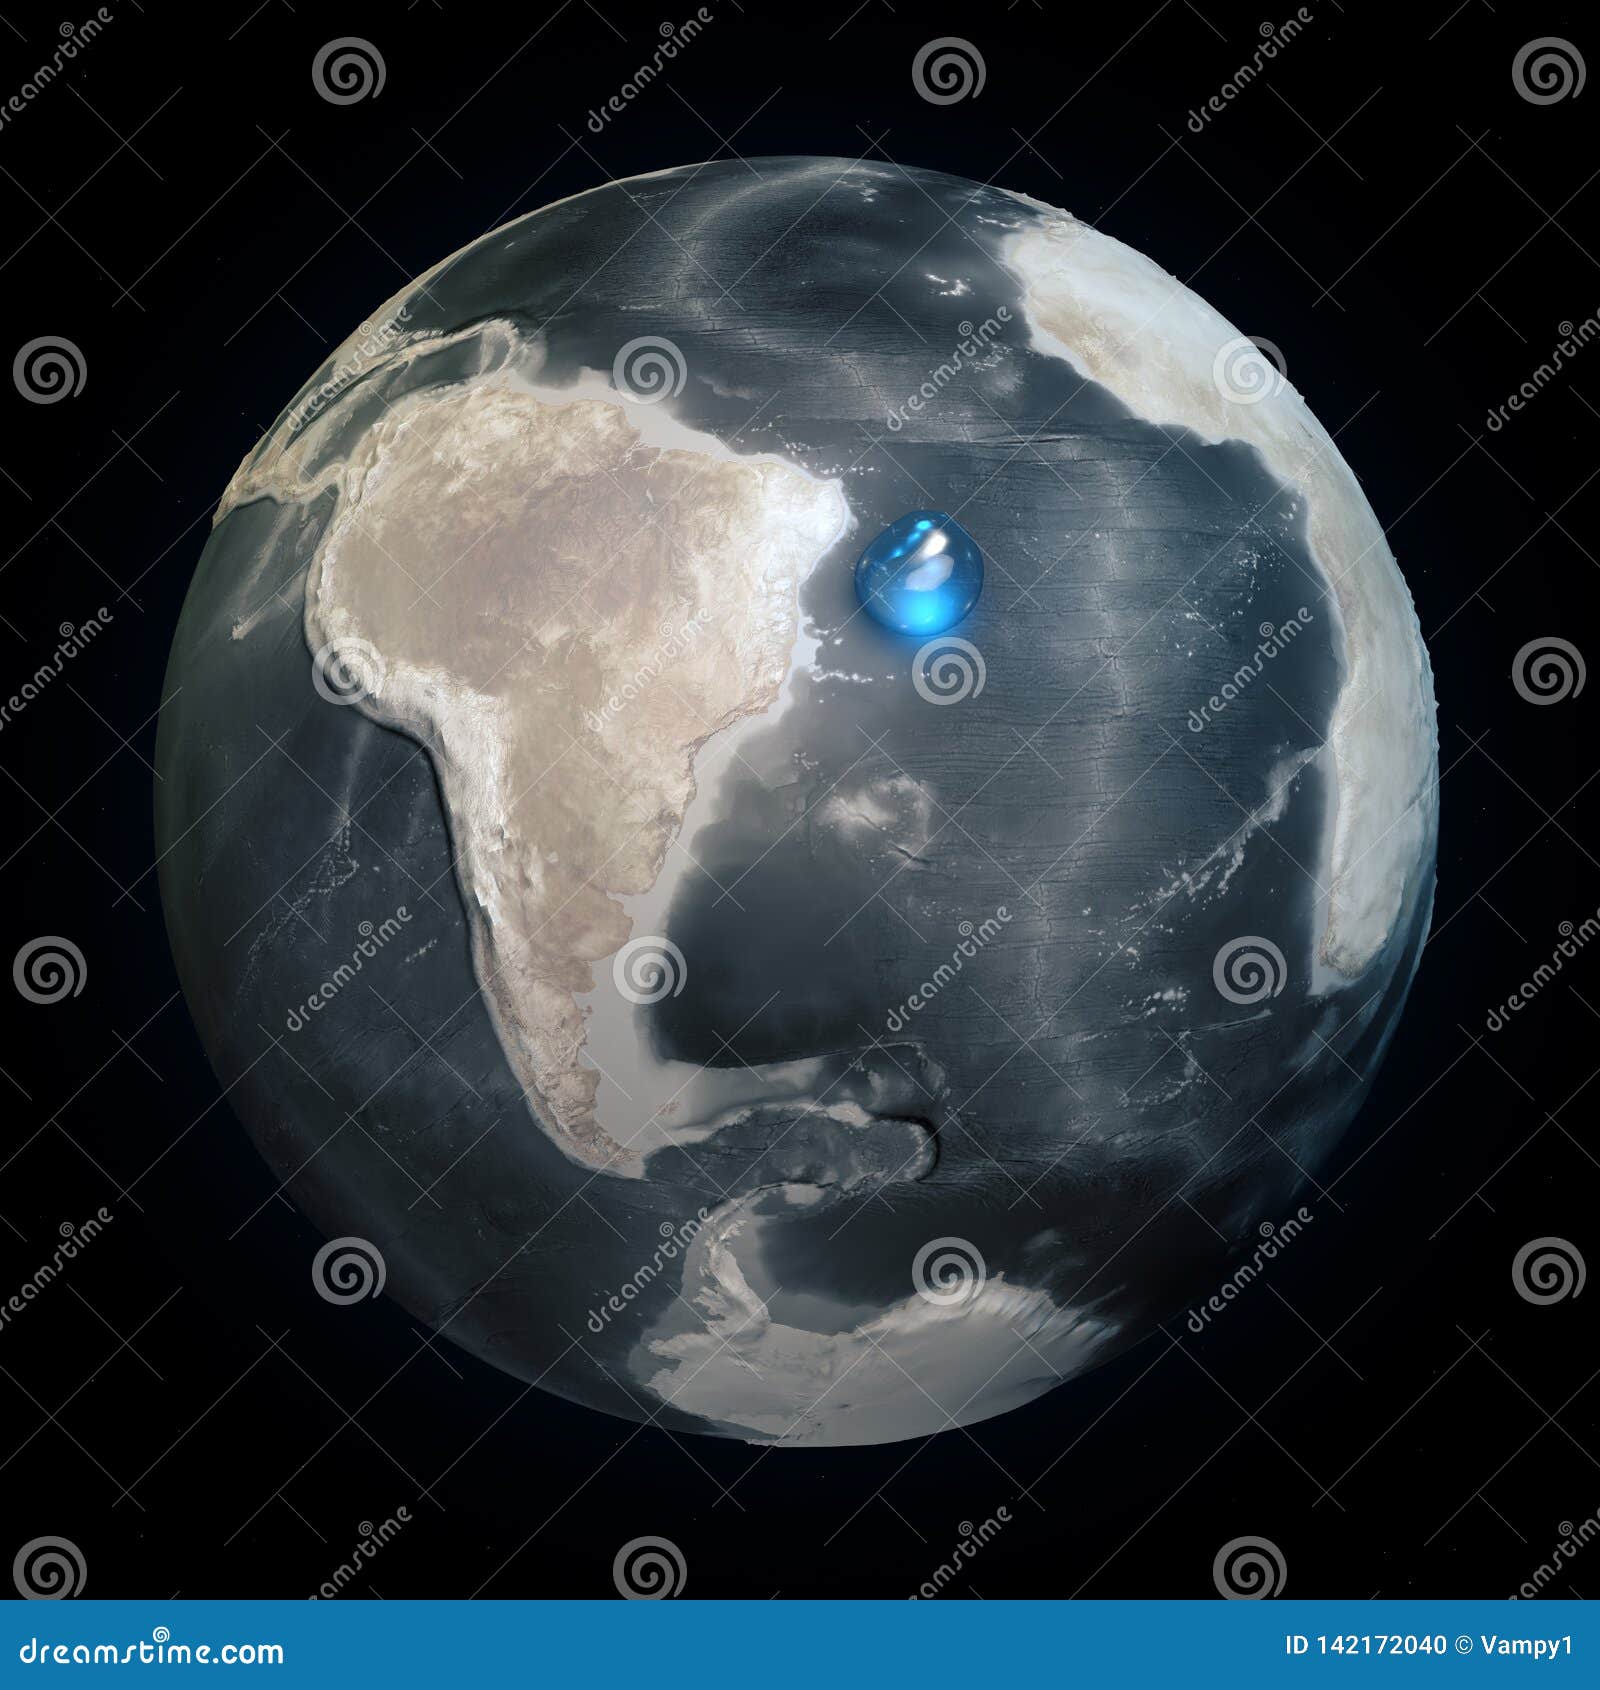 earth look like without water